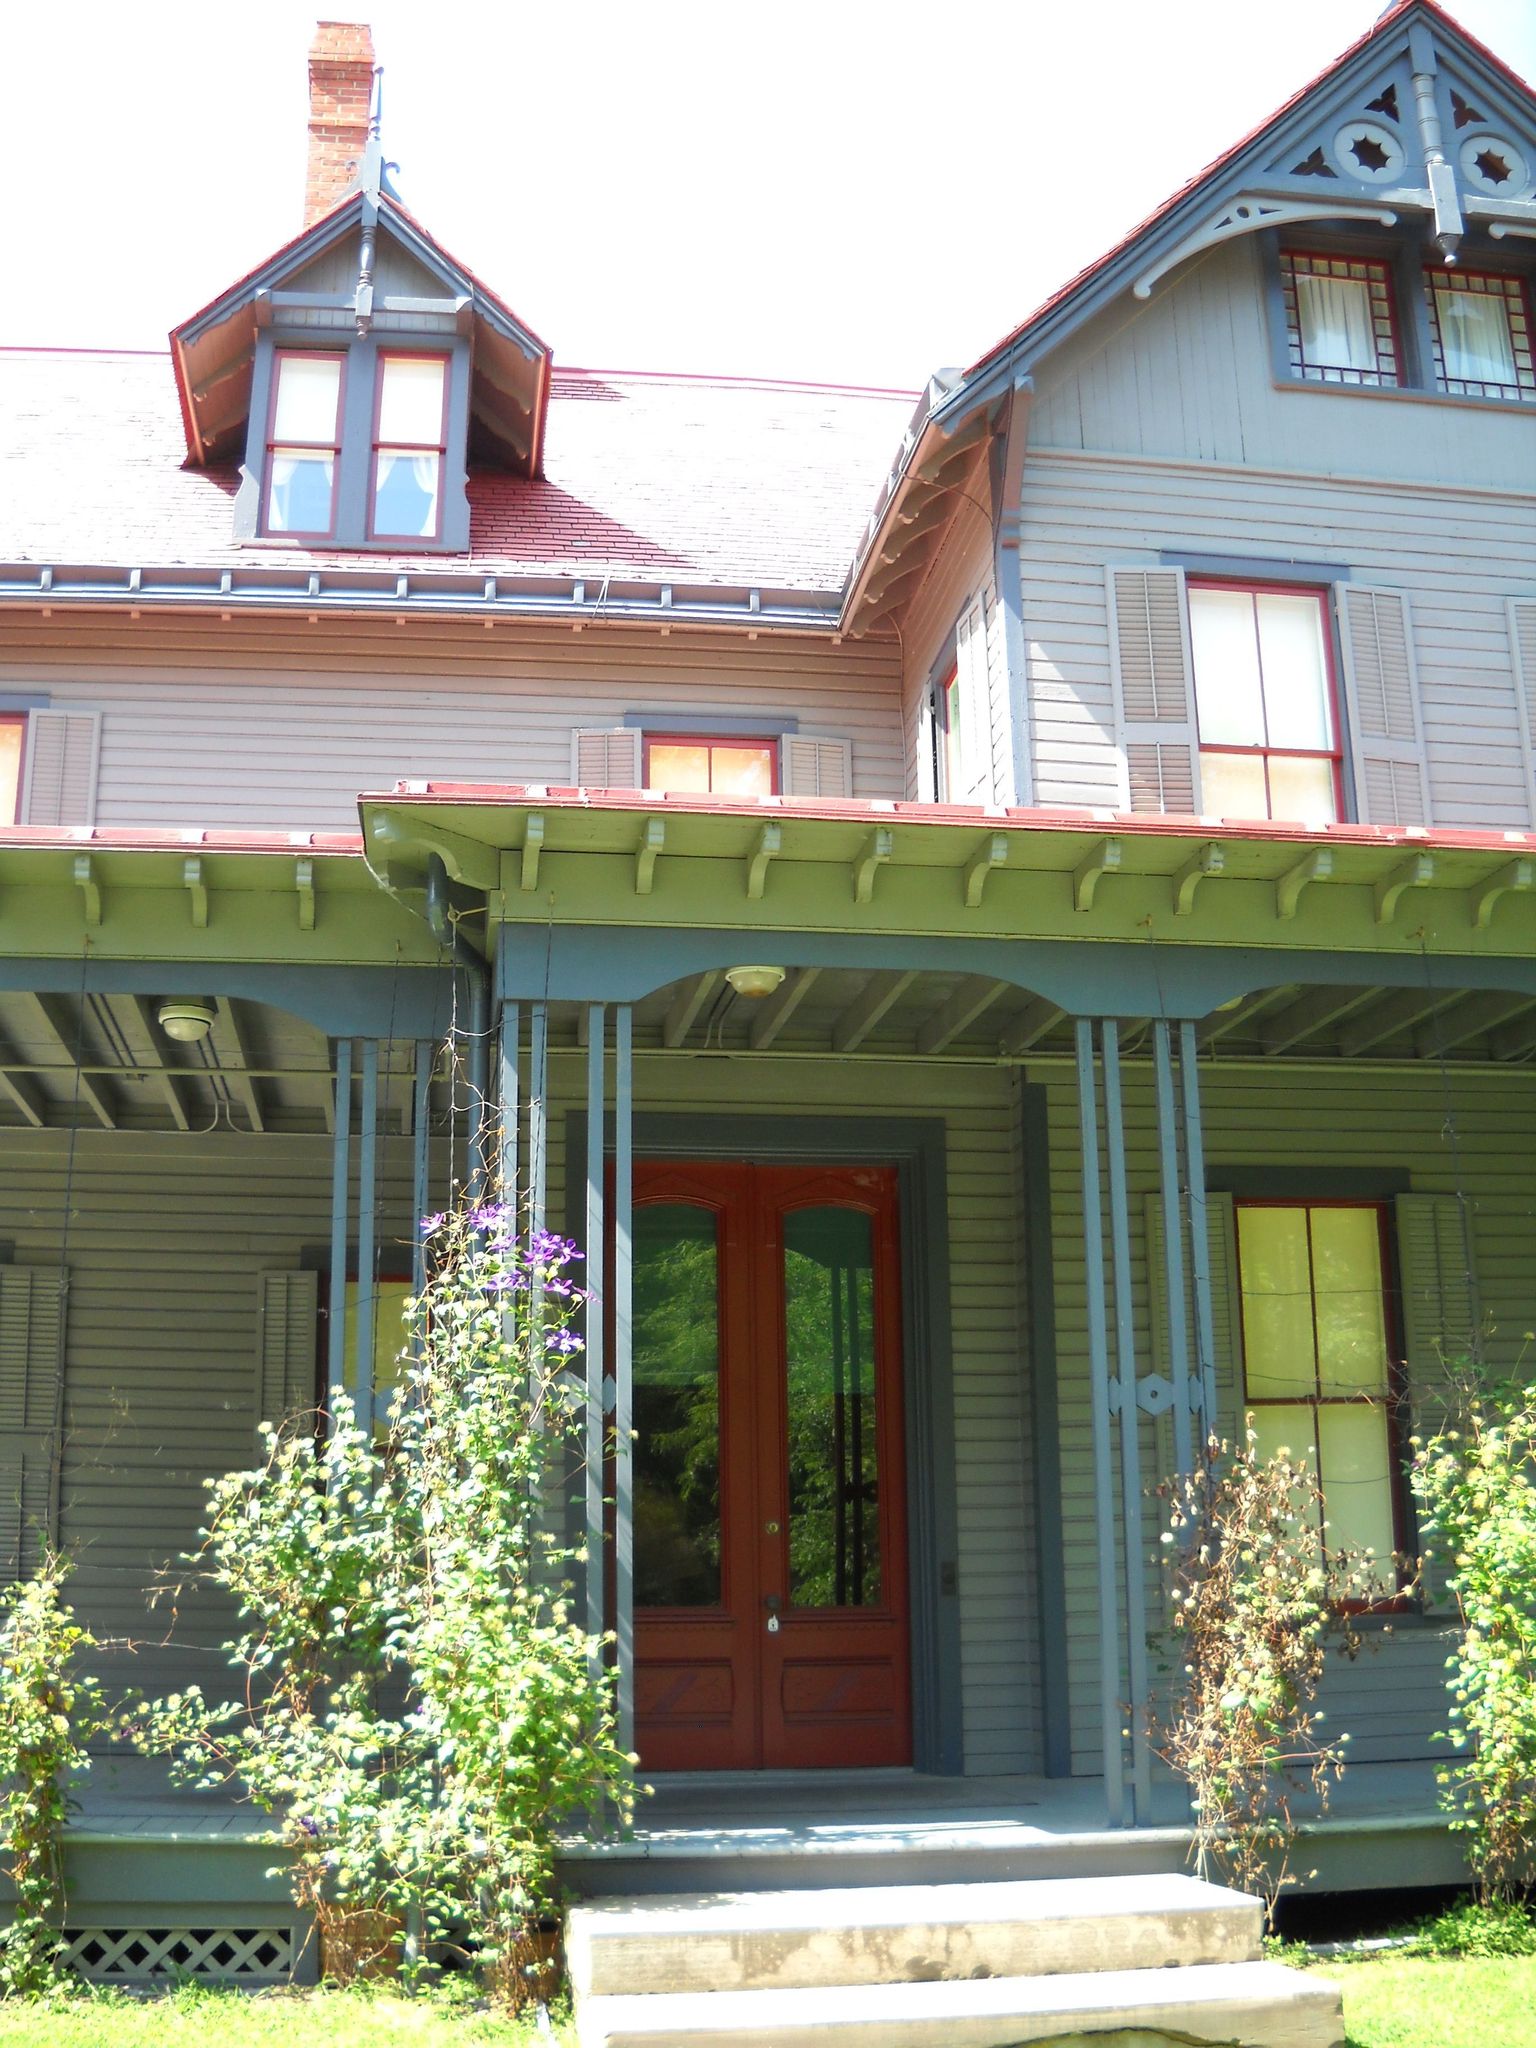 The front porch of James Garfield's home was the scene of the first front porch campaign. The presidential candidate gave patriotic speeches and met with thousands of people who came to which him well during the summer and fall of 1880.